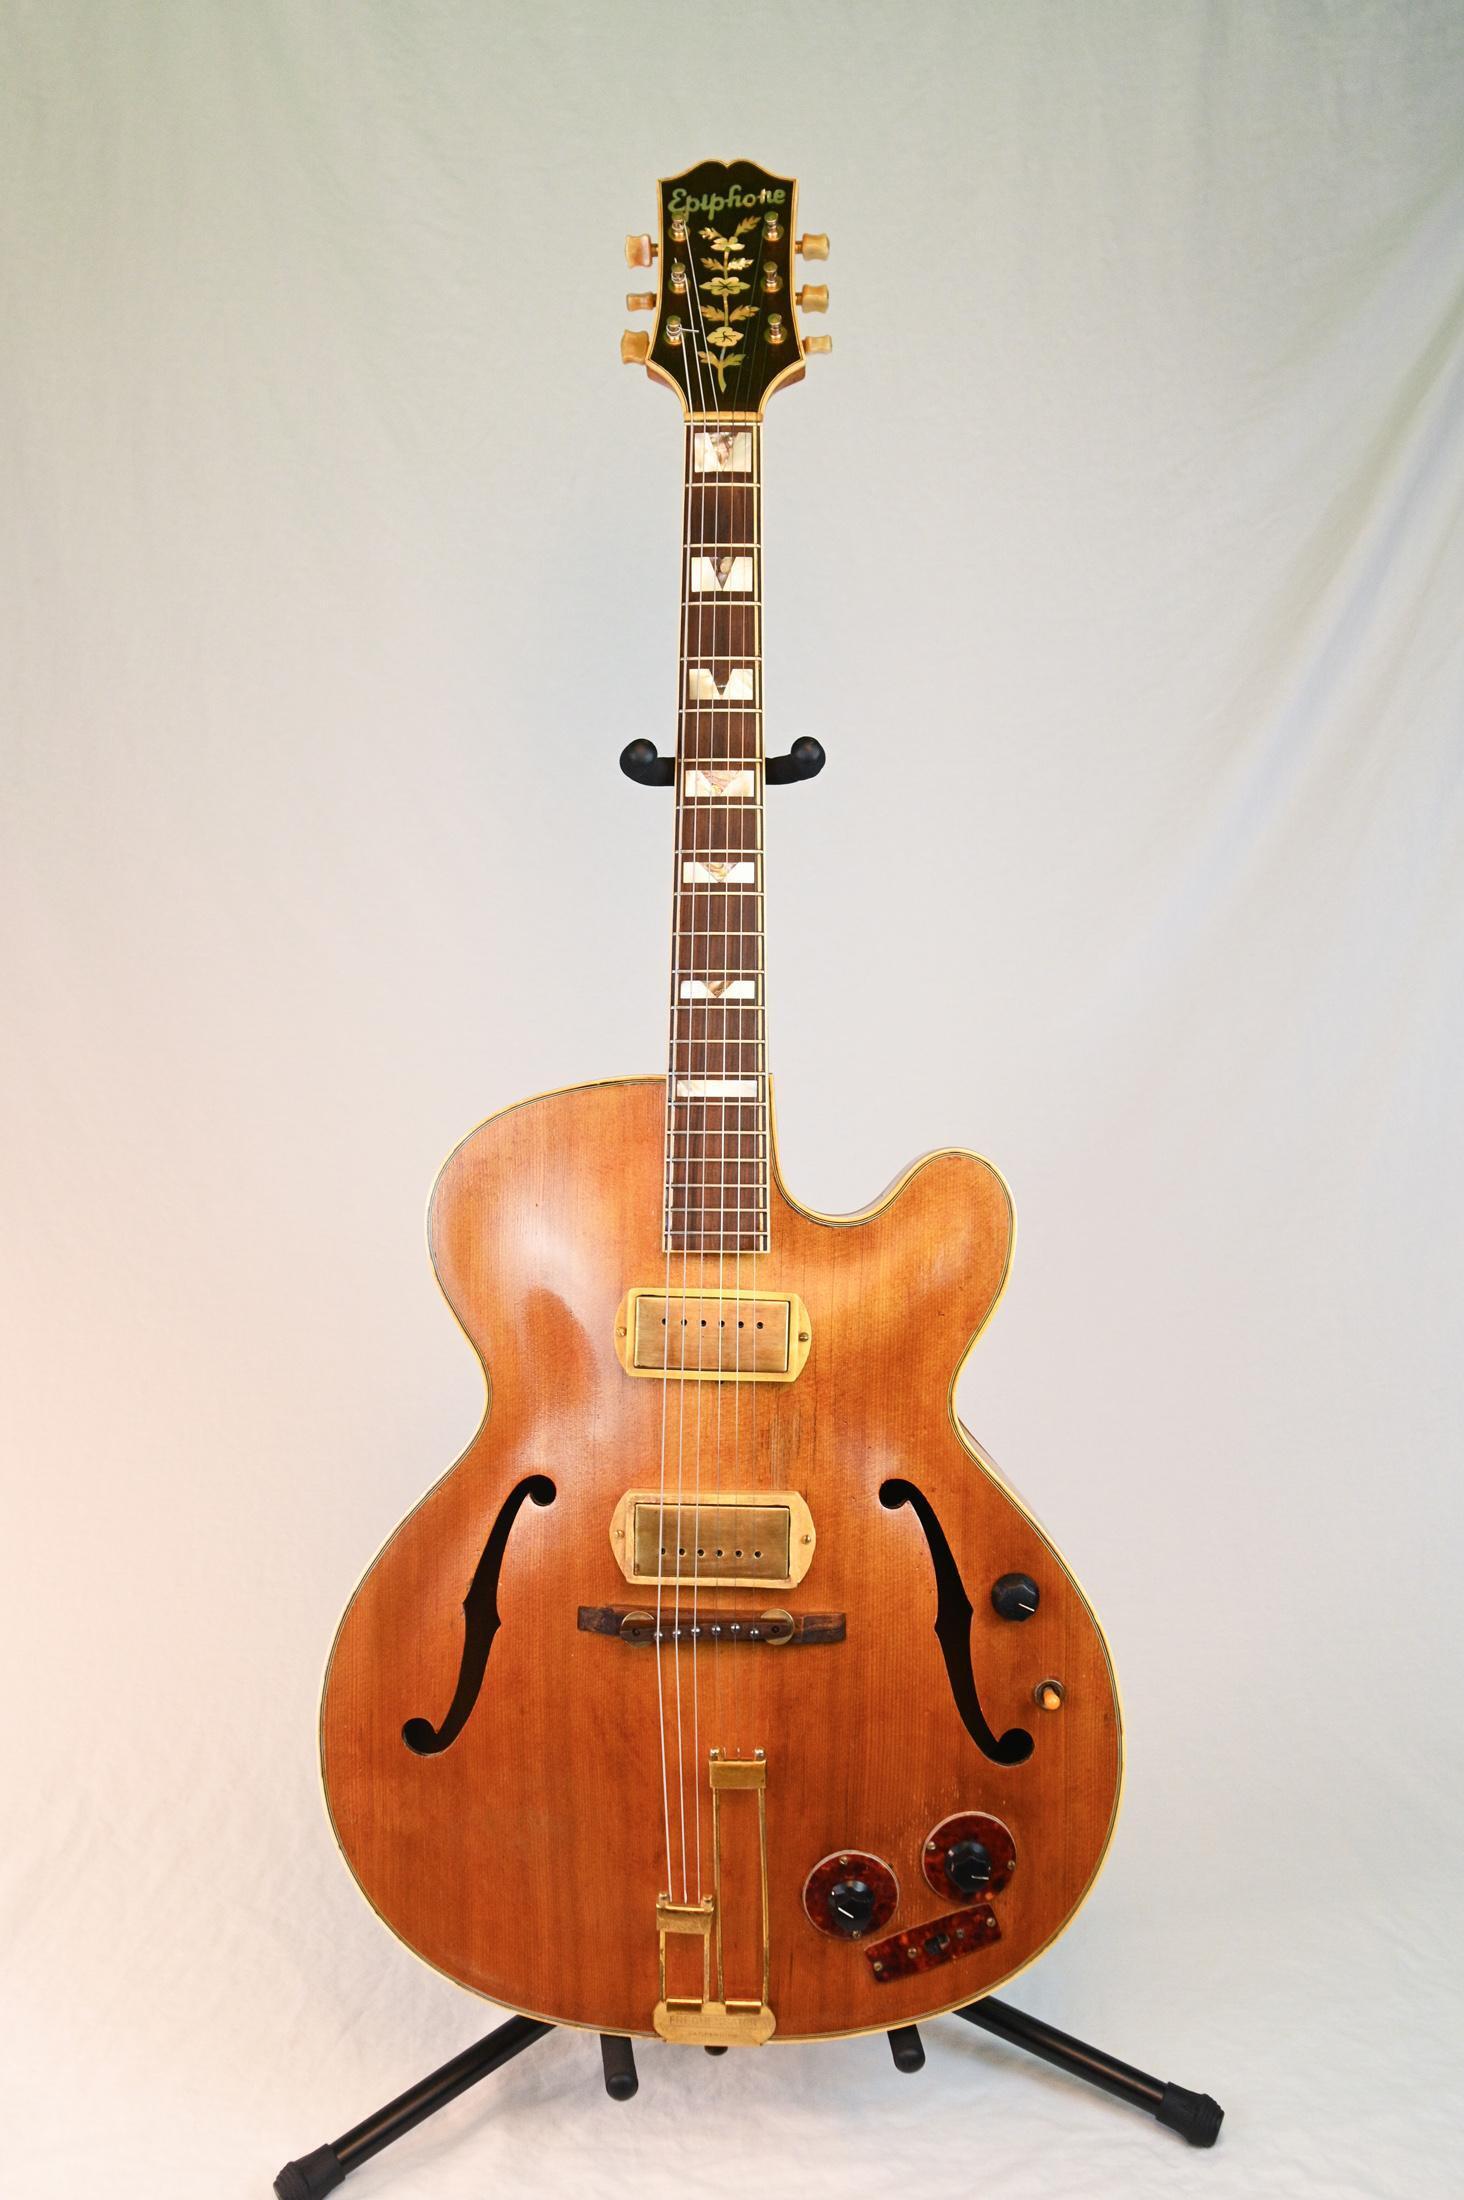 Used Epiphone Vintage Rare '48 - 1949 - Sweetwater's Gear Exchange